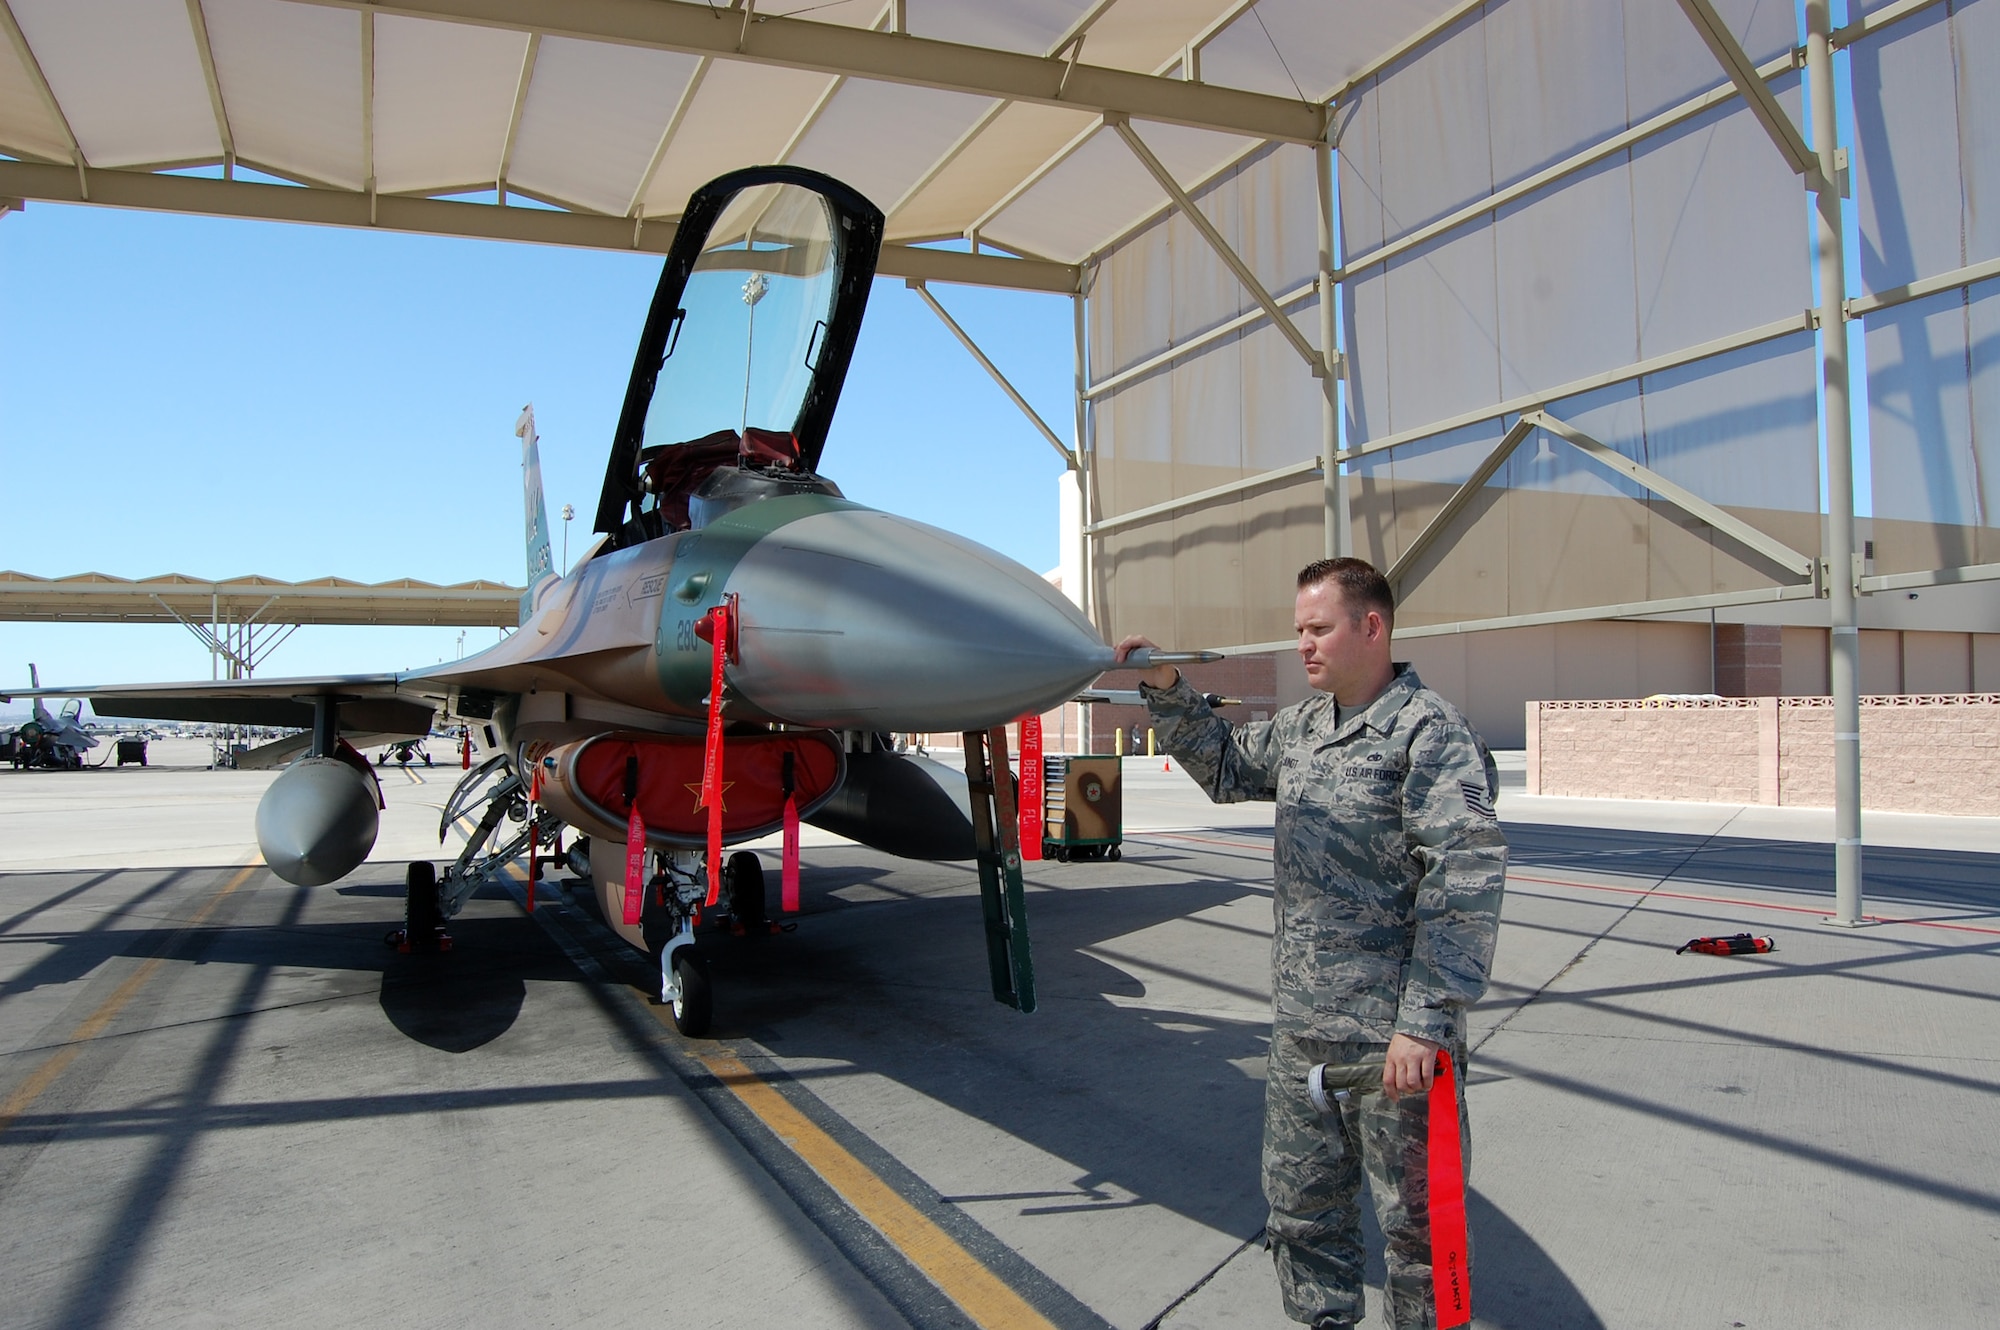 NELLIS AIR FORCE BASE, Nev. -- Tech. Sgt. Jonathan Jundt, 926th Aircraft Maintenance Squadron avionics craftsman, conducts an inspection of a pitot probe for the air data system on an F-16 Aggressor aircraft here April 1. (U.S. Air Force photo/Capt. Jessica Martin)